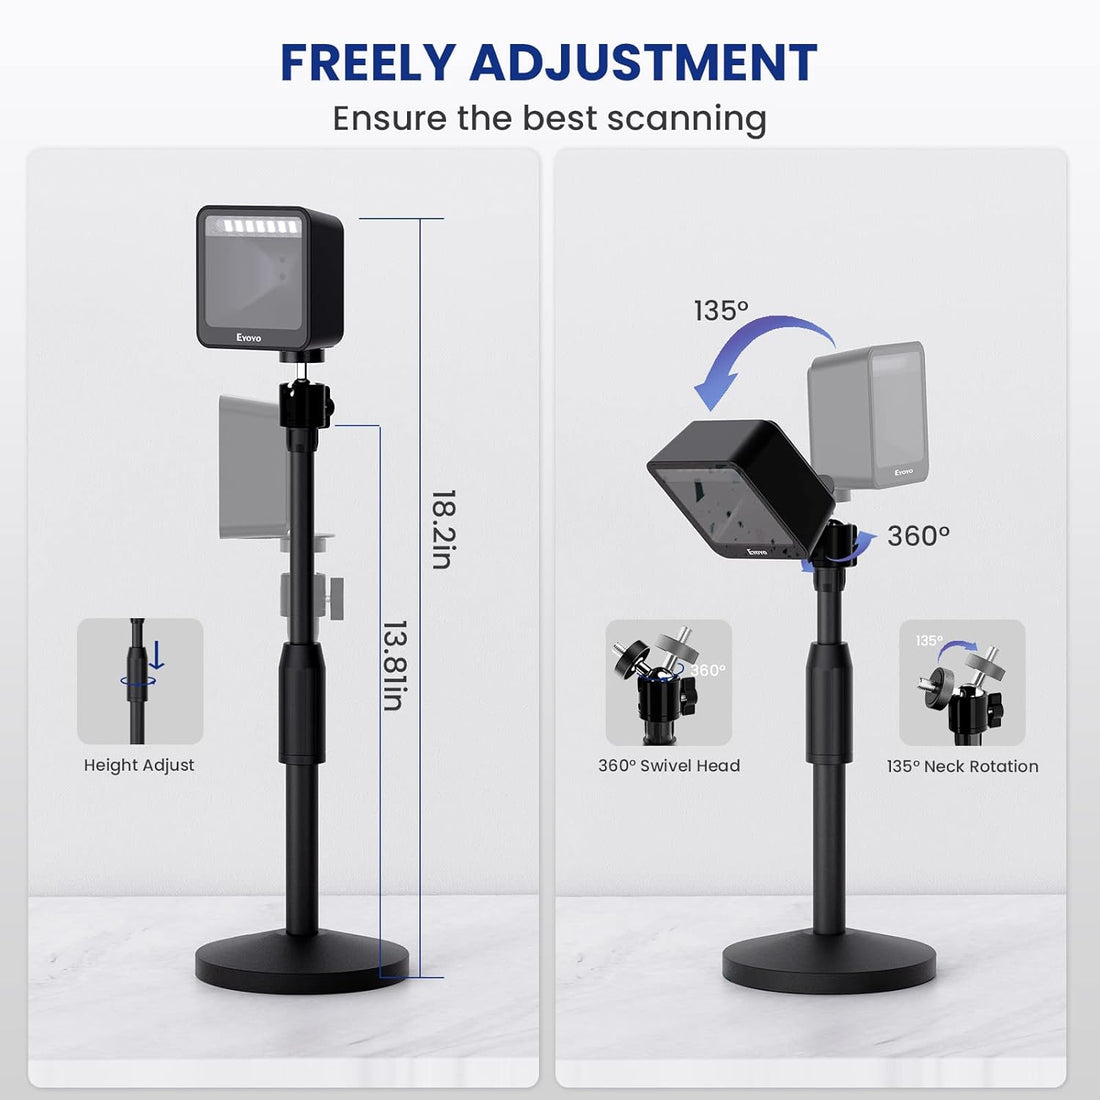 Eyoyo 1D 2D Hands-Free Barcode Scanner with Height Adjustable Stand, Omni-Directional Presentation Desktop Bar Code Scanner with Automatic Sensing Scanning for POS Checkout Counter Book Library Retail